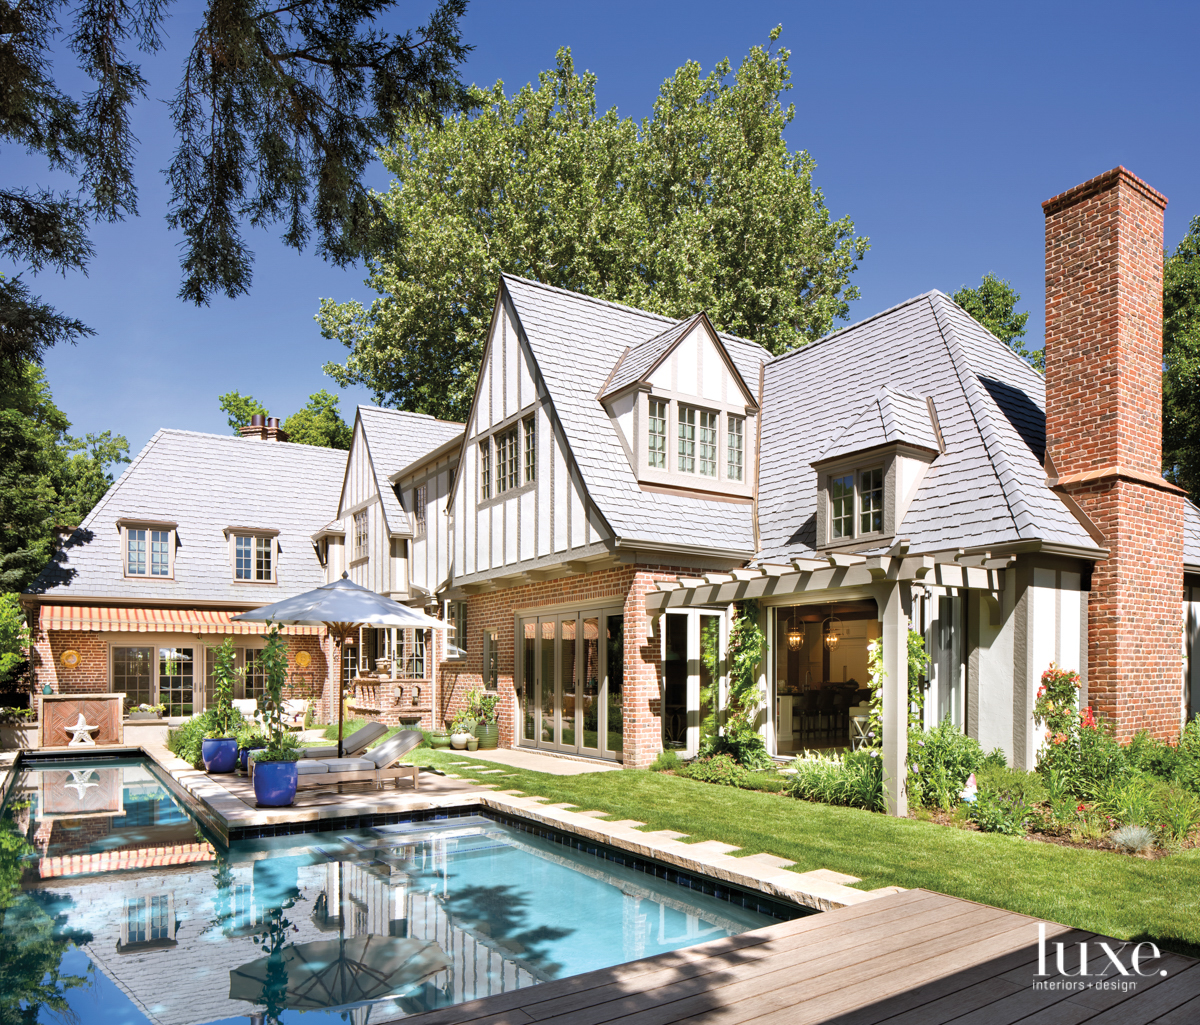 Bring On The Storybook Charm: A Historic Denver Tudor Embraces Playful Patterns {Bring On The Storybook Charm: A Historic Denver Tudor Embraces Playful Patterns} – English